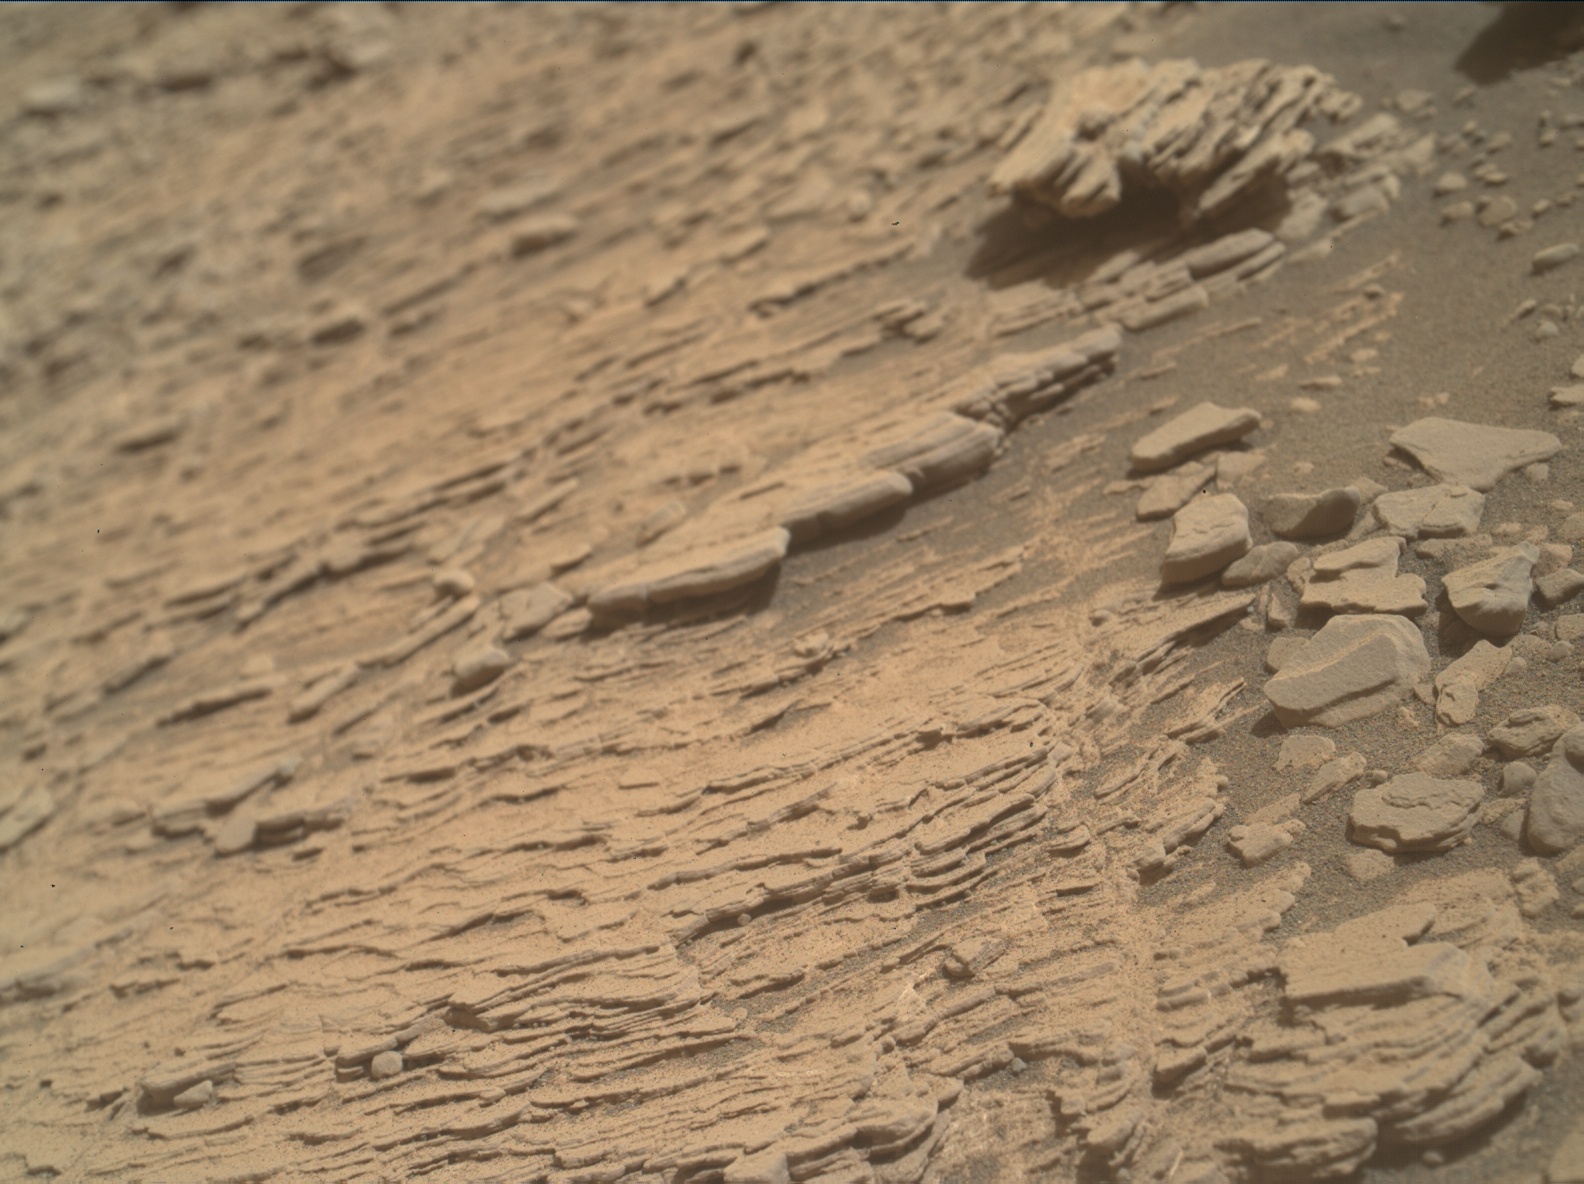 Nasa's Mars rover Curiosity acquired this image using its Mars Hand Lens Imager (MAHLI) on Sol 2465